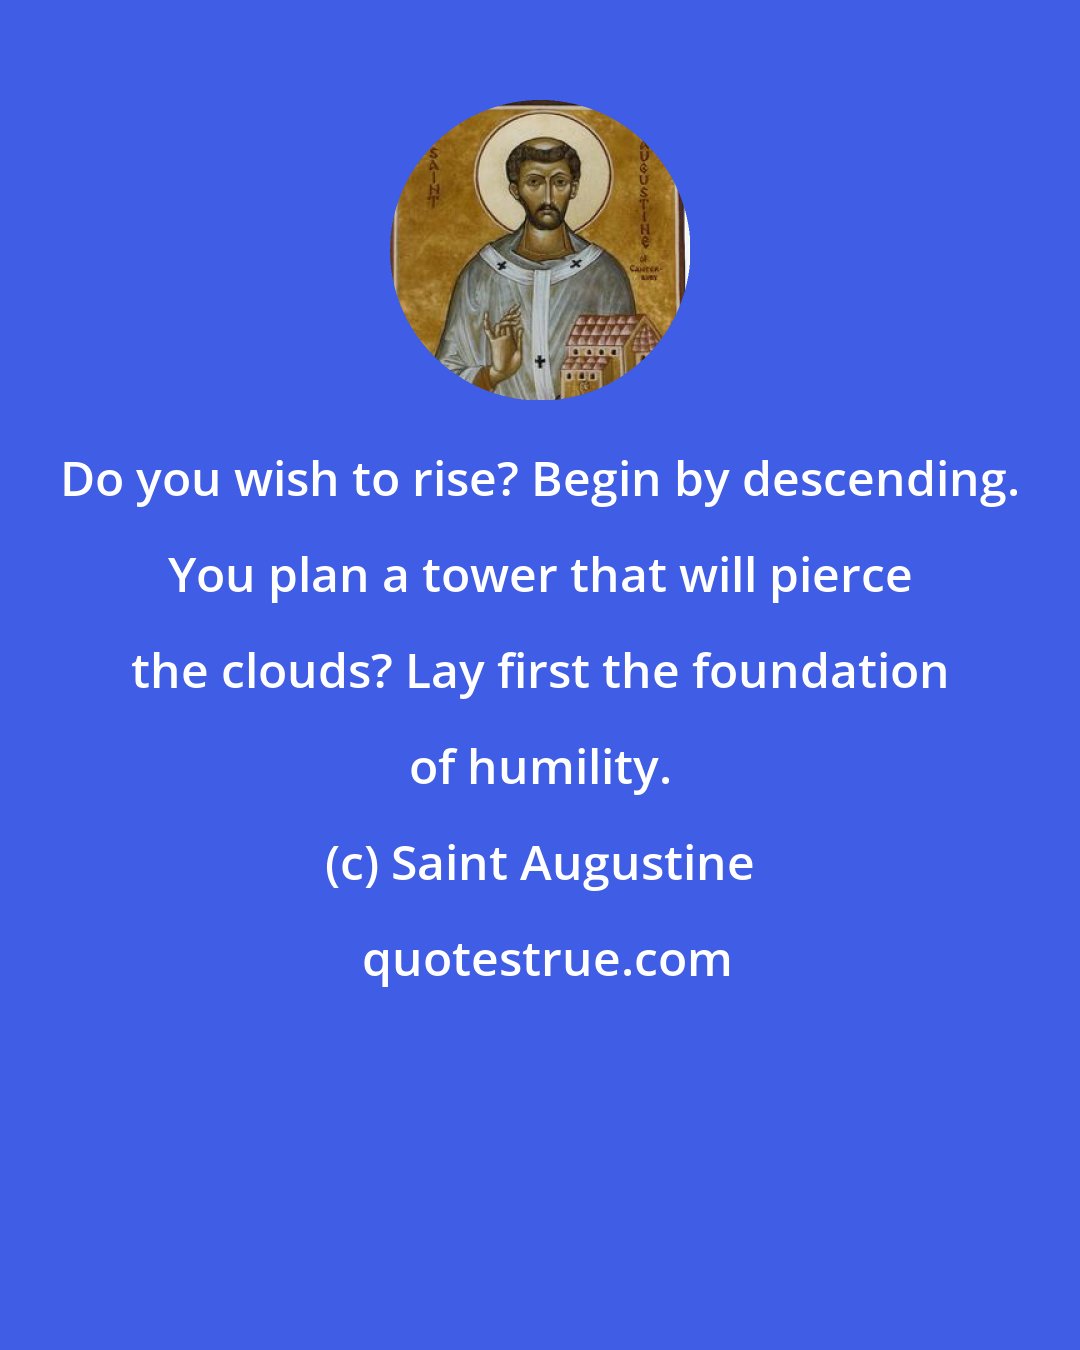 Saint Augustine: Do you wish to rise? Begin by descending. You plan a tower that will pierce the clouds? Lay first the foundation of humility.